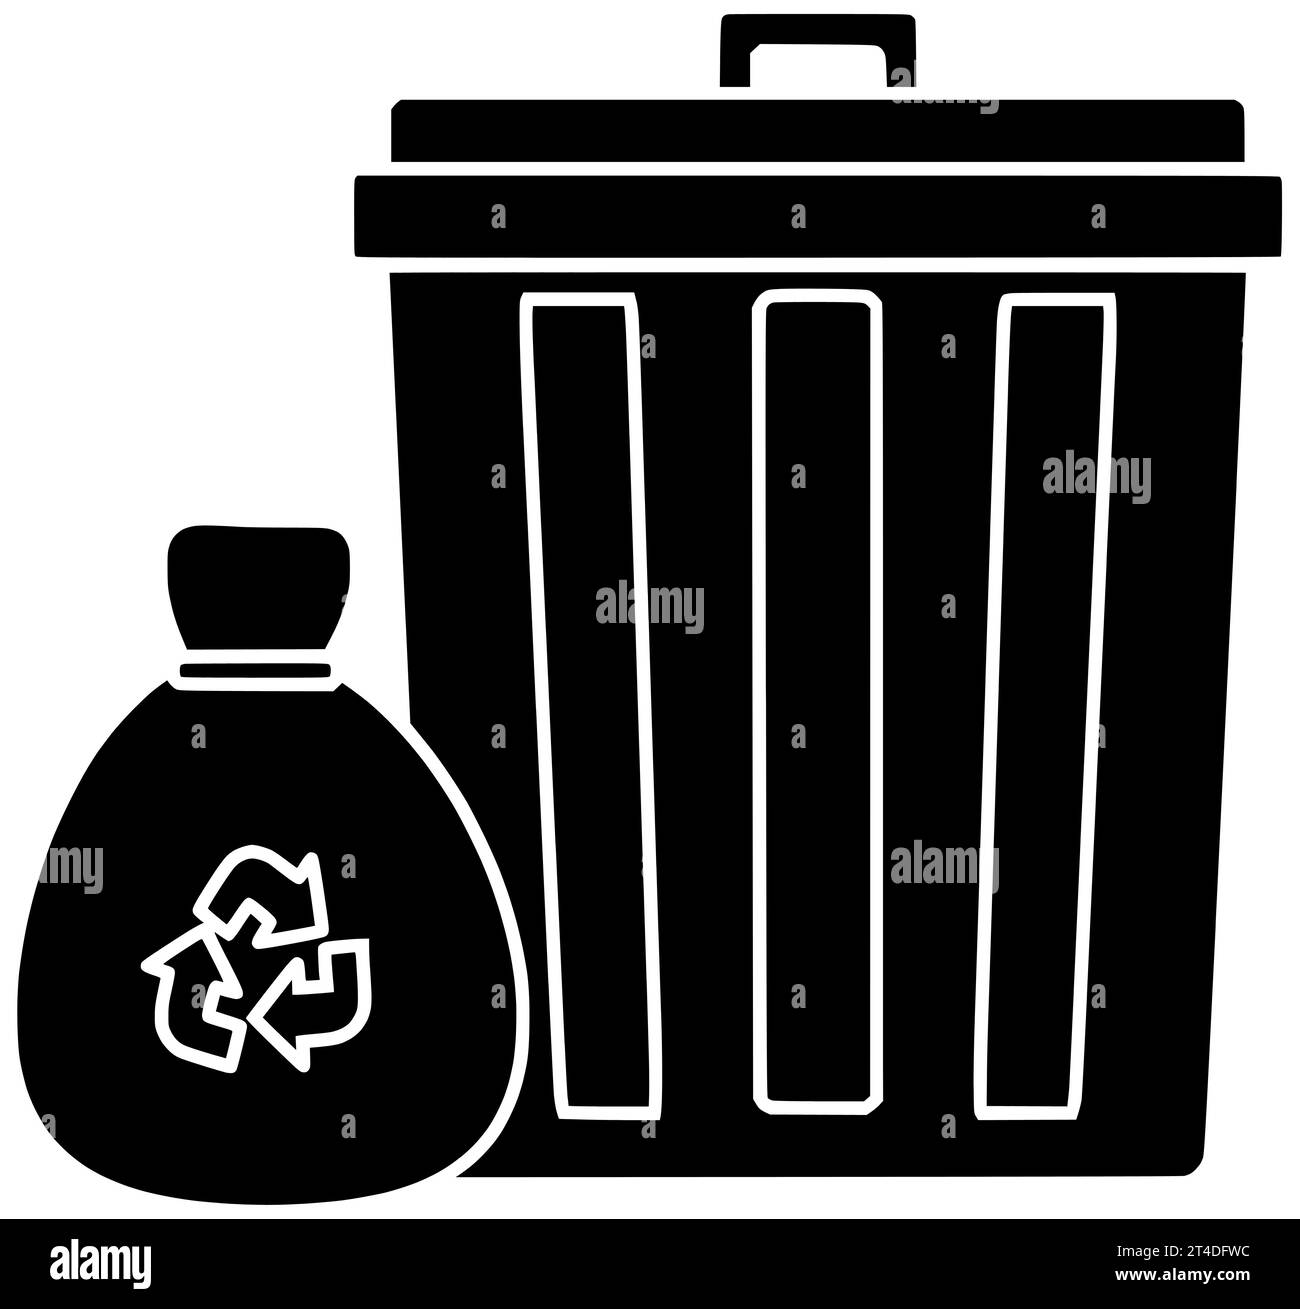 trash black garbage silhouette waste illustration rubbish icon plastic logo bag recycle ecology clean recycling bin environment junk pollution contain Stock Photo